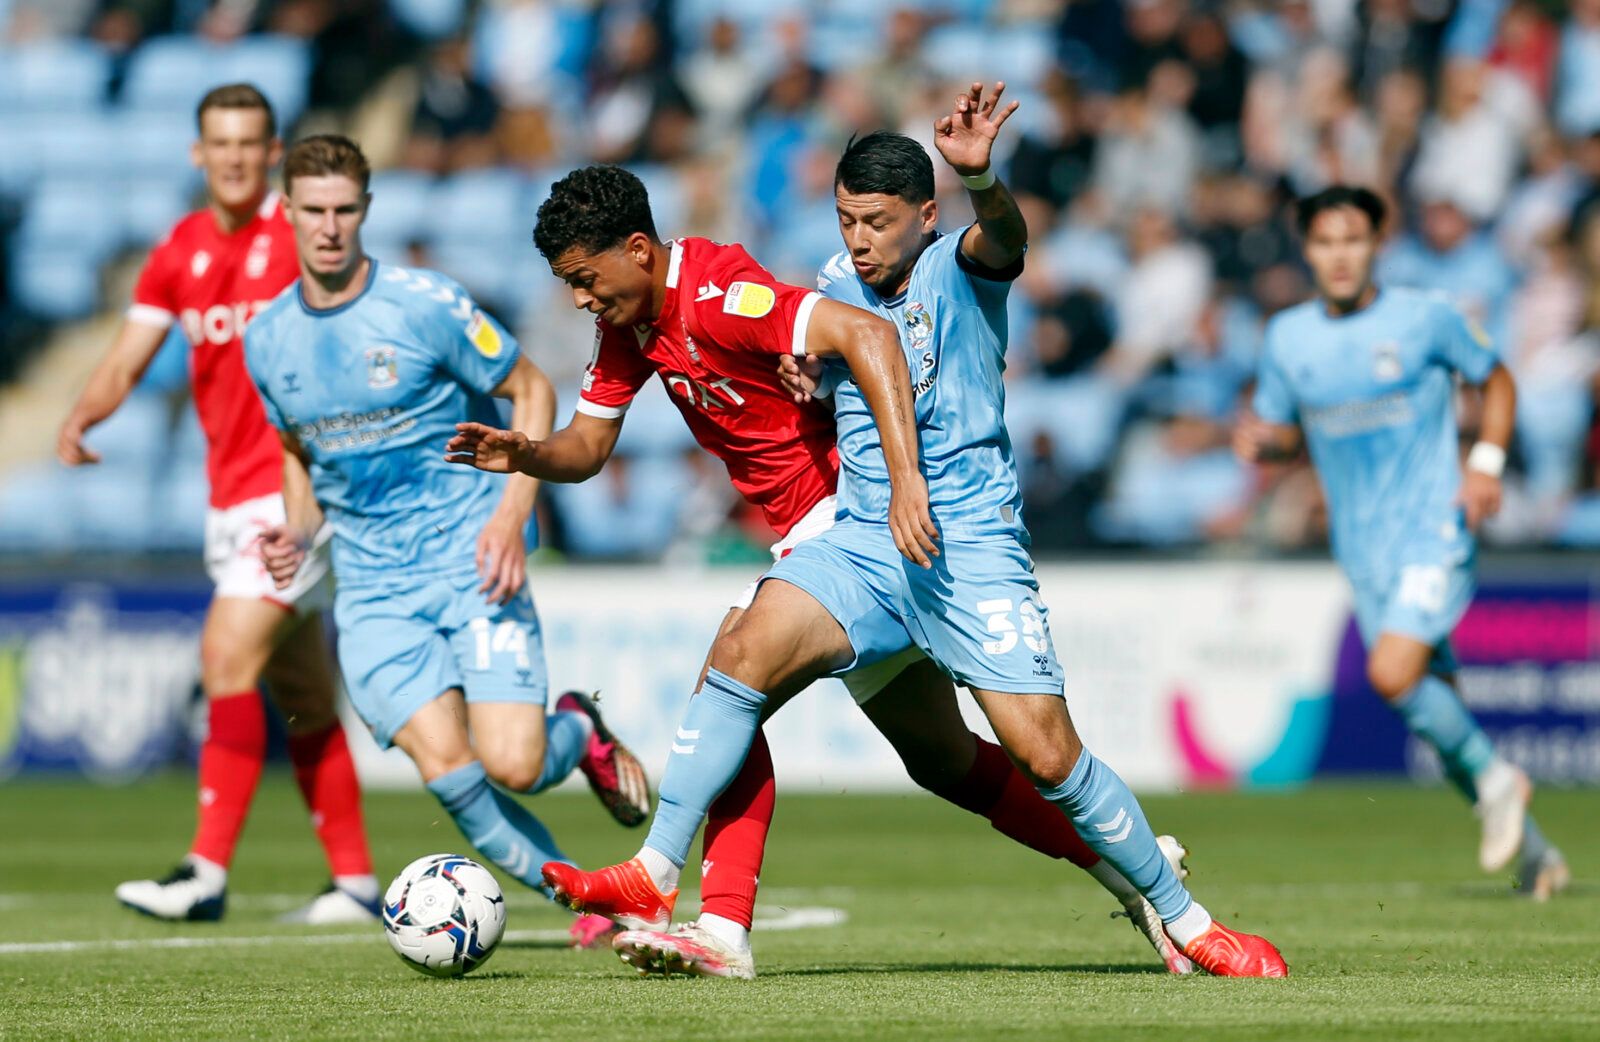 Soccer Football - Championship - Coventry City v Nottingham Forest - Coventry Building Society Arena, Coventry, Britain - August 8, 2021 Nottingham Forest's Brennan Johnson in action with Coventry City's Gustavo Hamer Action Images/Ed Sykes